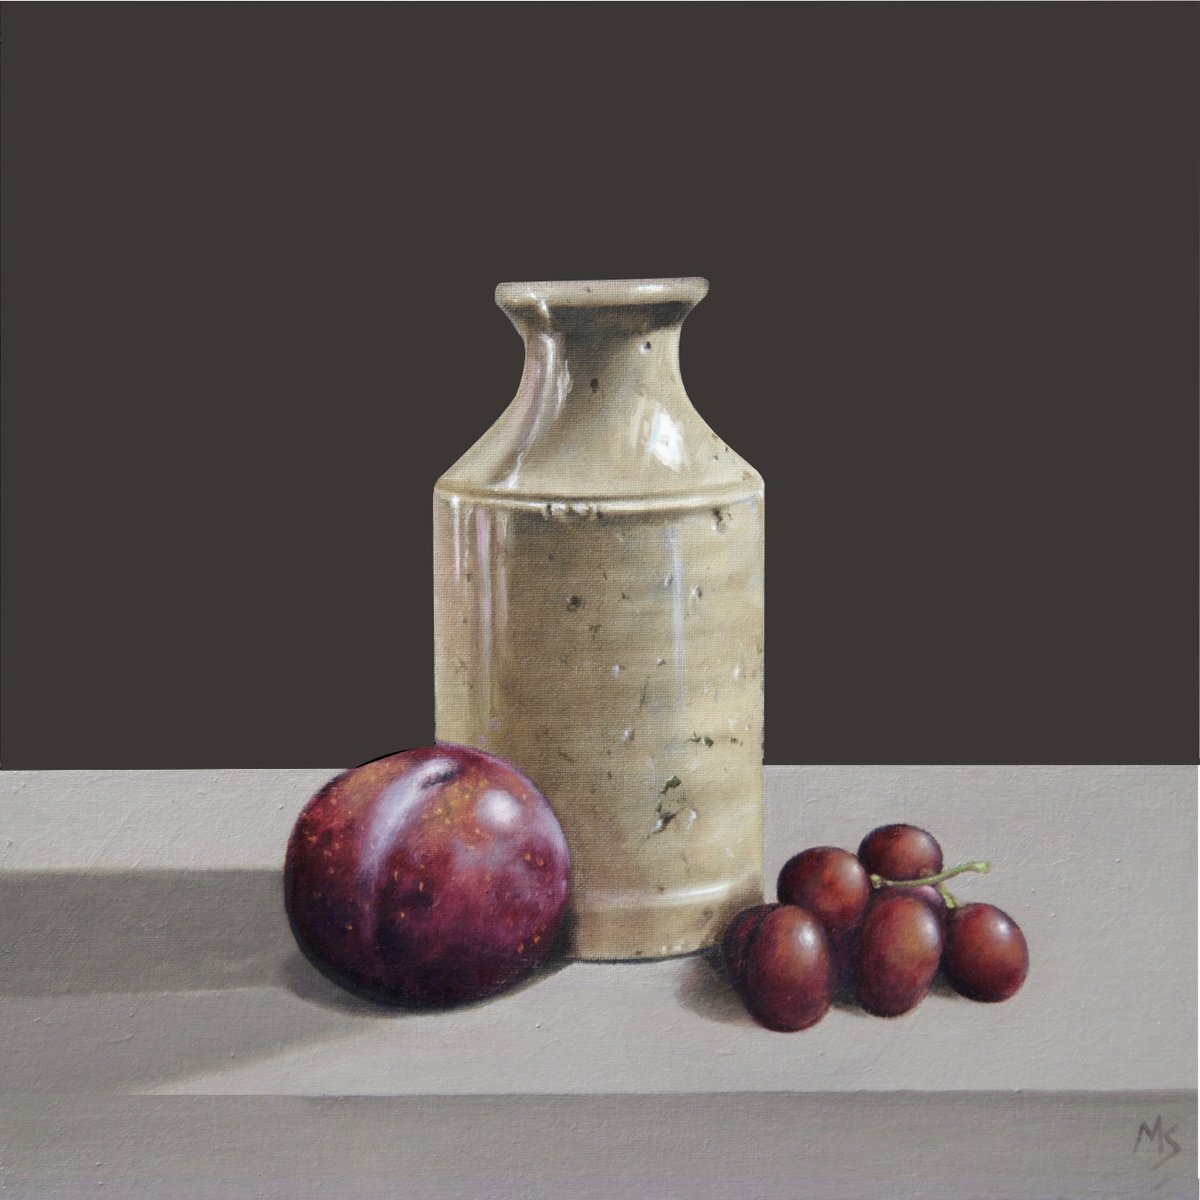 Vase plums and grapes by Mike Skidmore